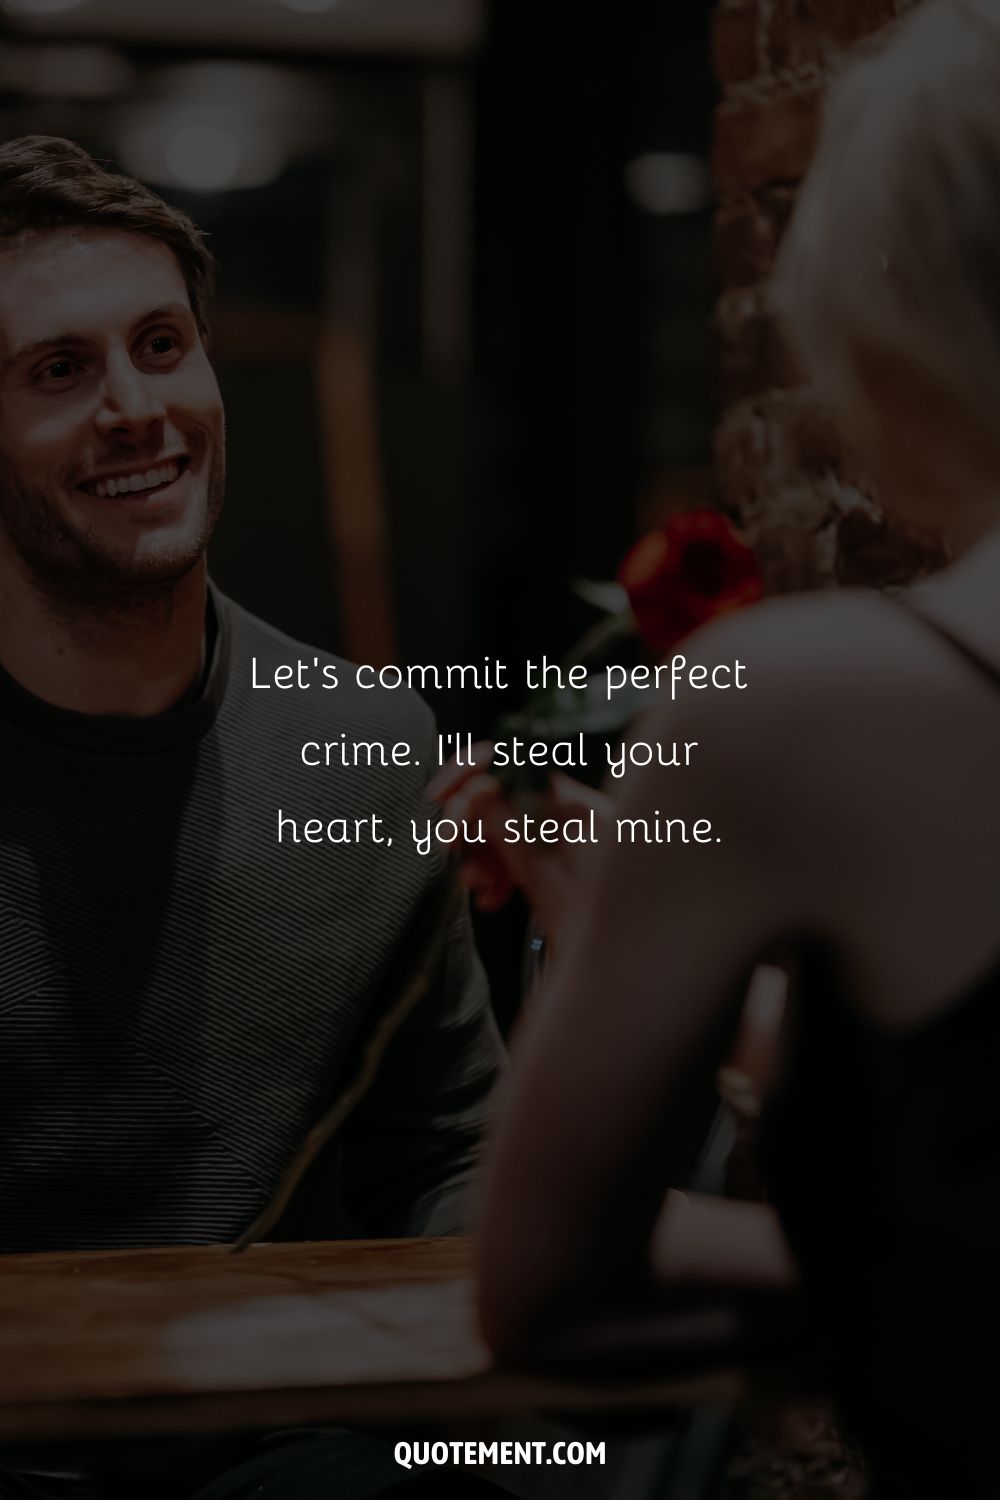 Let’s commit the perfect crime. I’ll steal your heart, you steal mine.